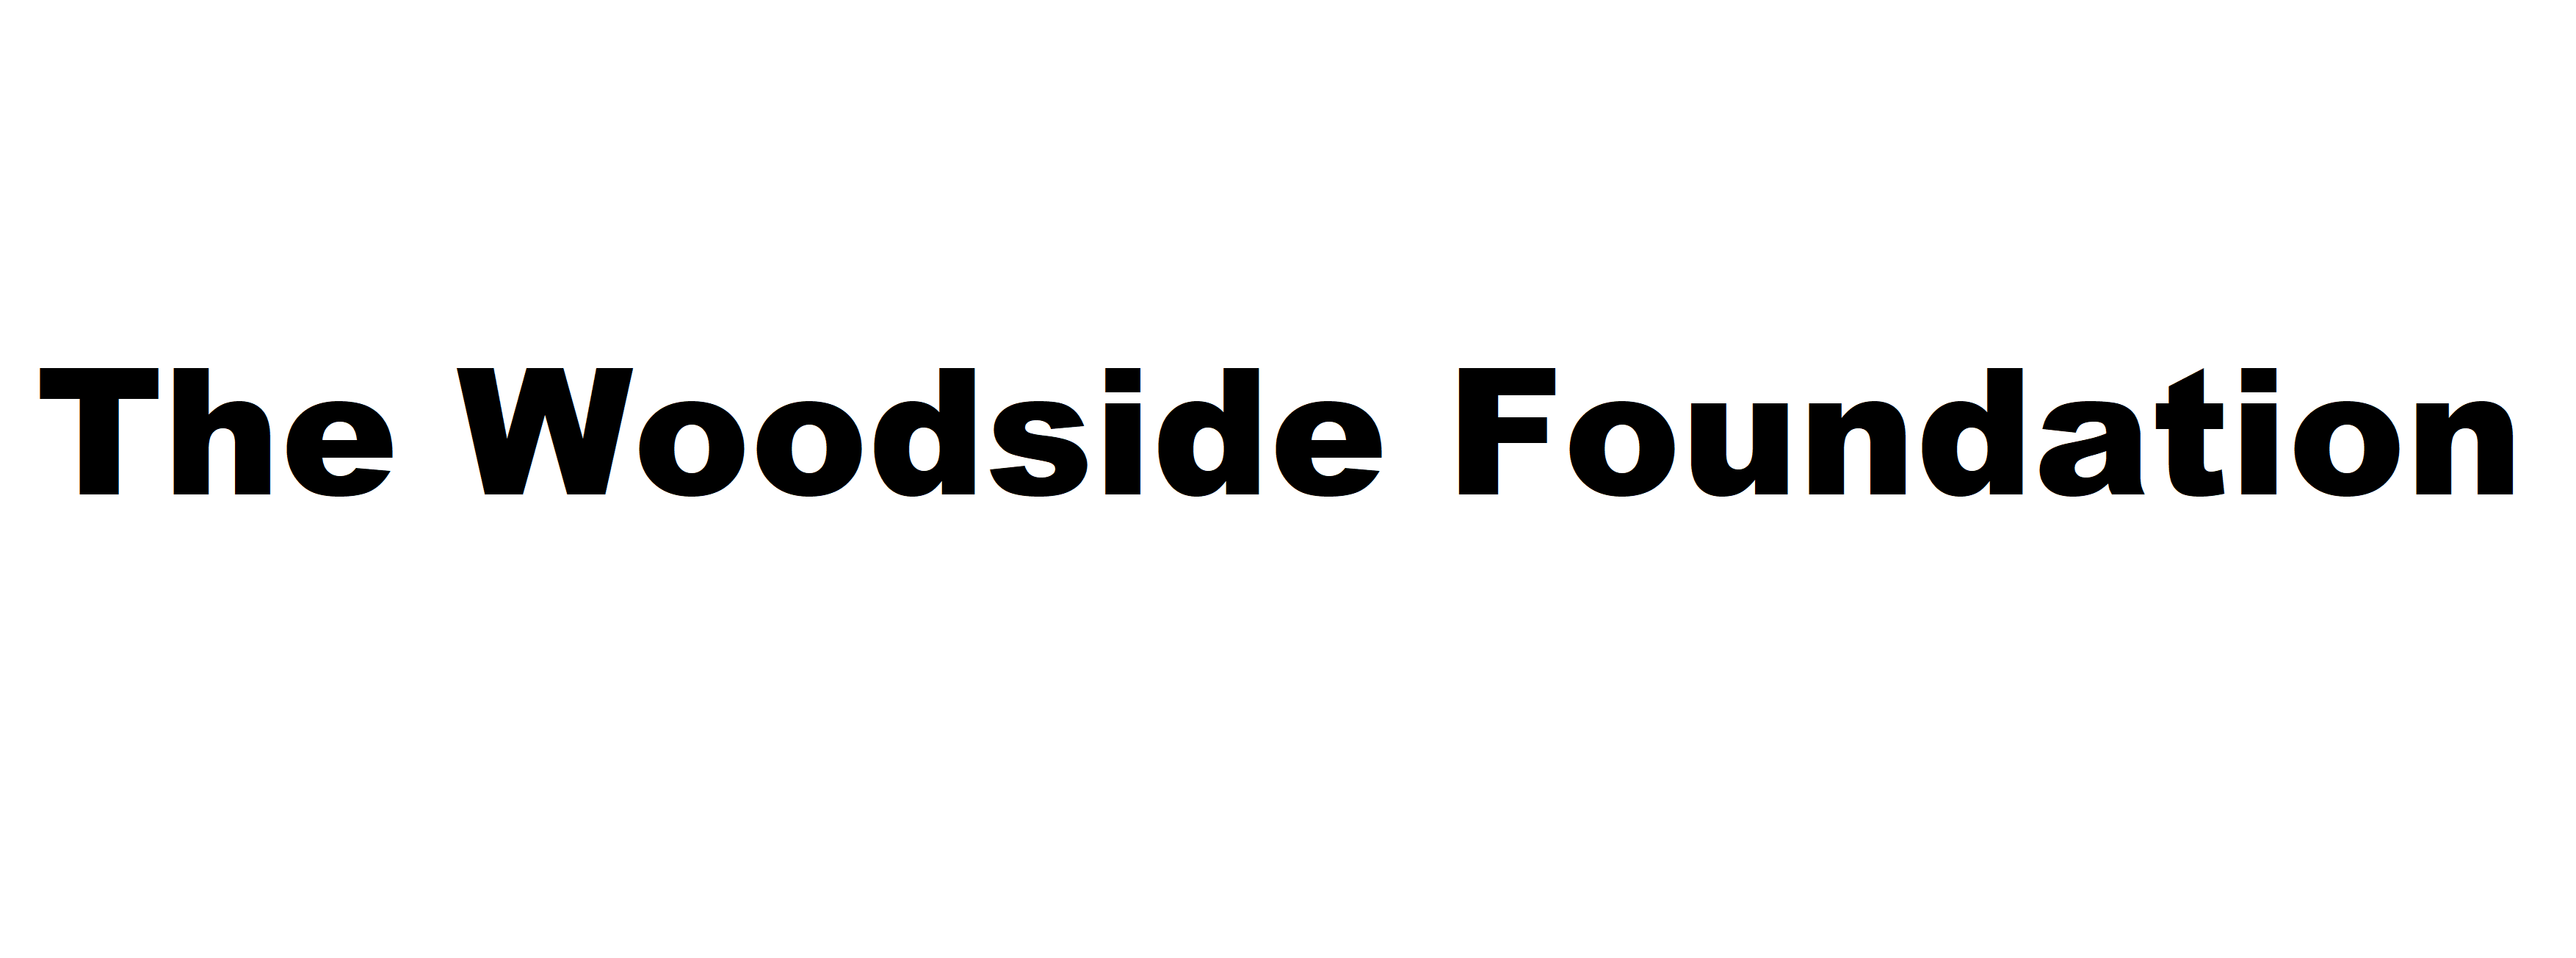 The Woodside Foundation